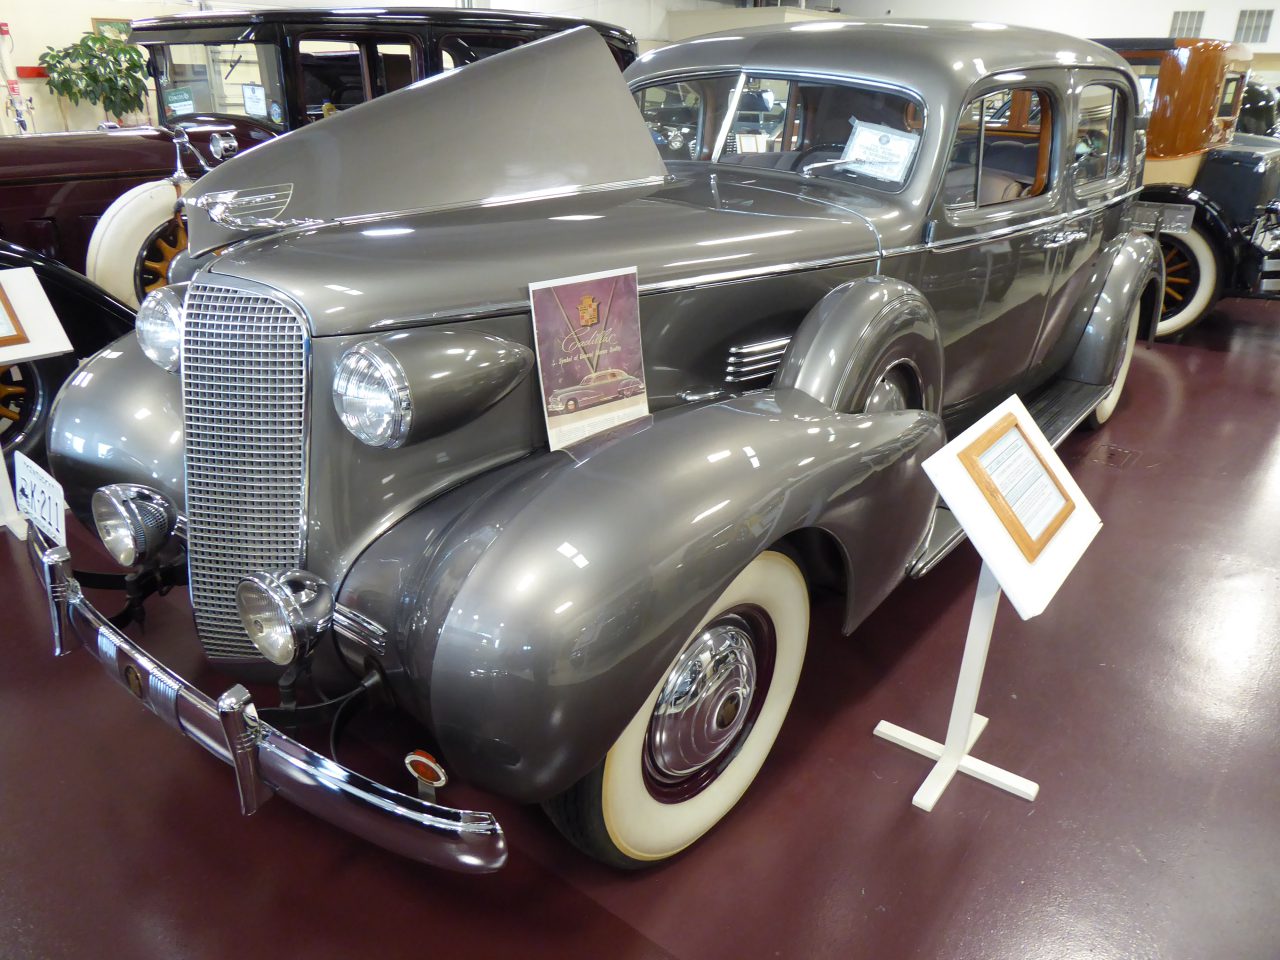 swope's cars of yesteryear, Cars With Stories: A Visit to a Kentucky Auto Museum, ClassicCars.com Journal